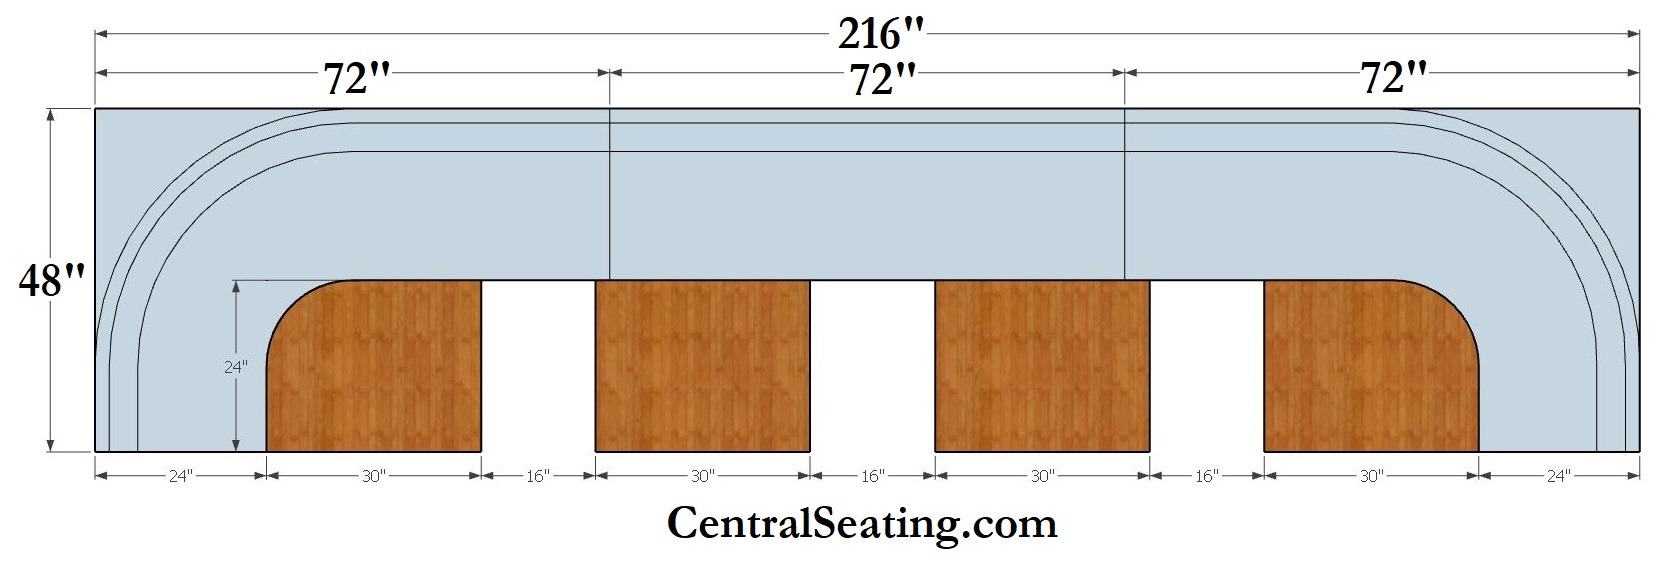 Table Size for 216